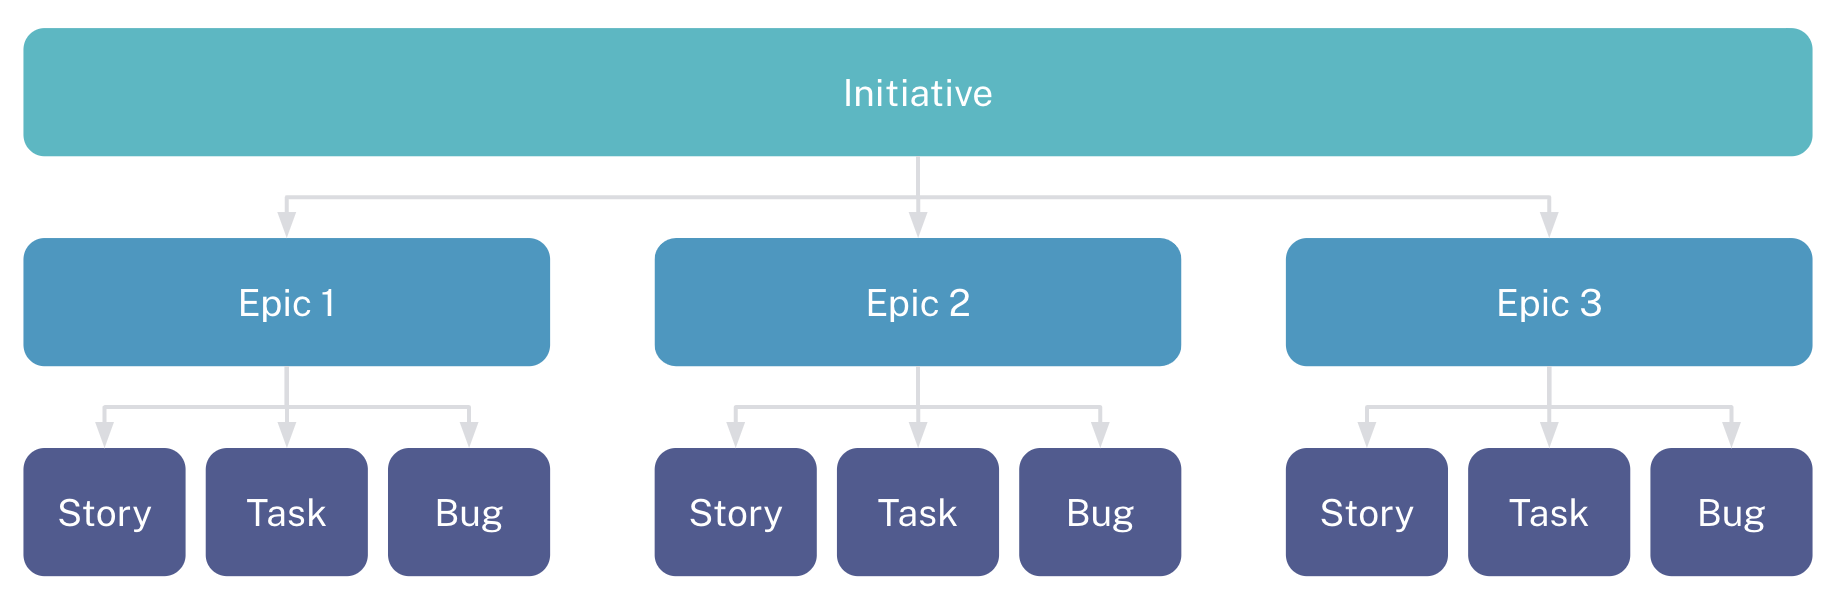 Initiatives inform Epics which then inform our stories, tasks, and bugs